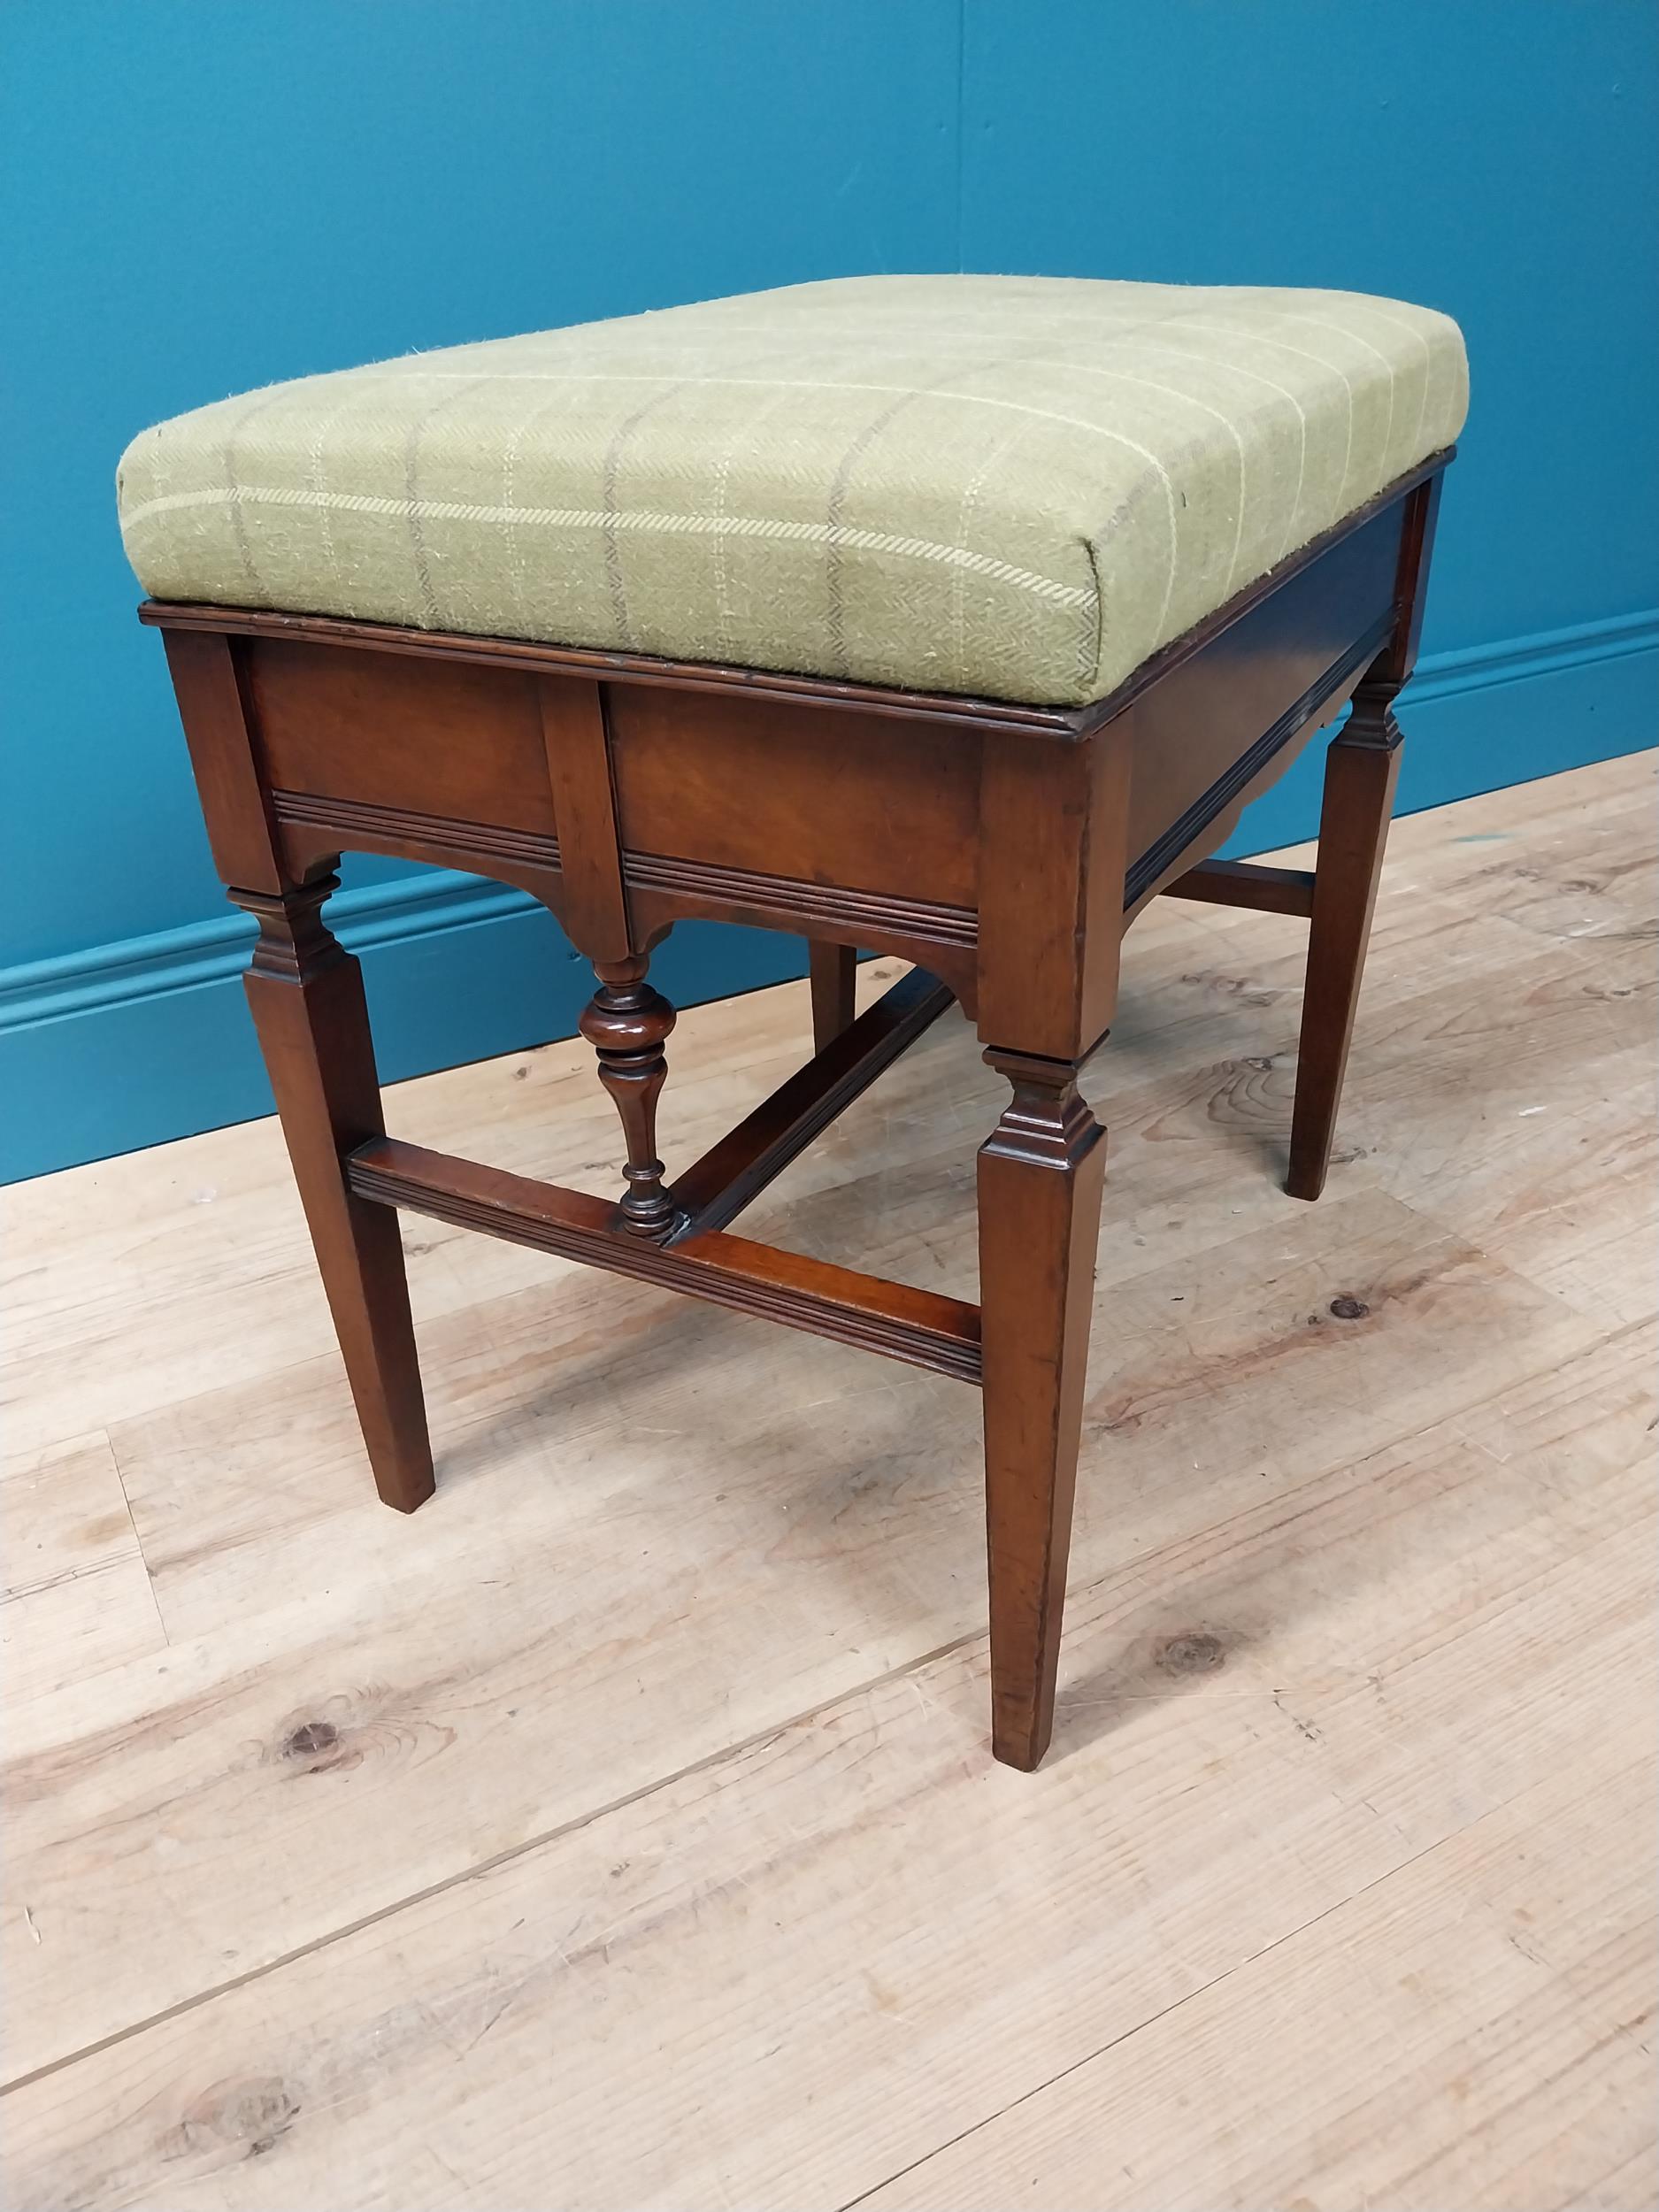 Good quality Edwardian mahogany piano stool with upholstered seat and lift up seat raised on - Image 3 of 3